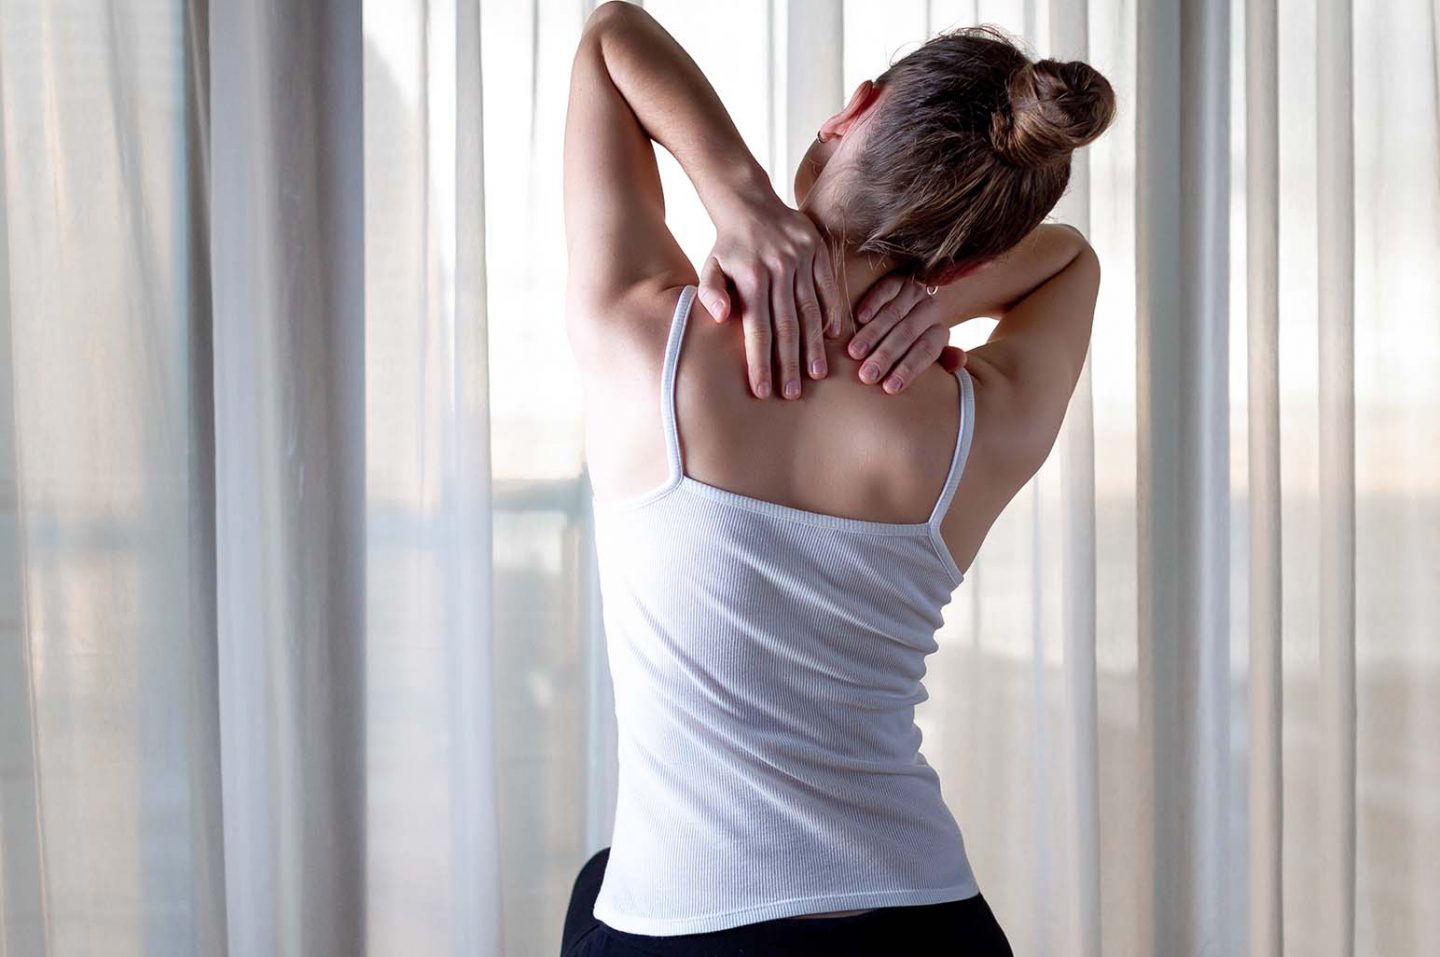 How to Cope With Chronic Pain